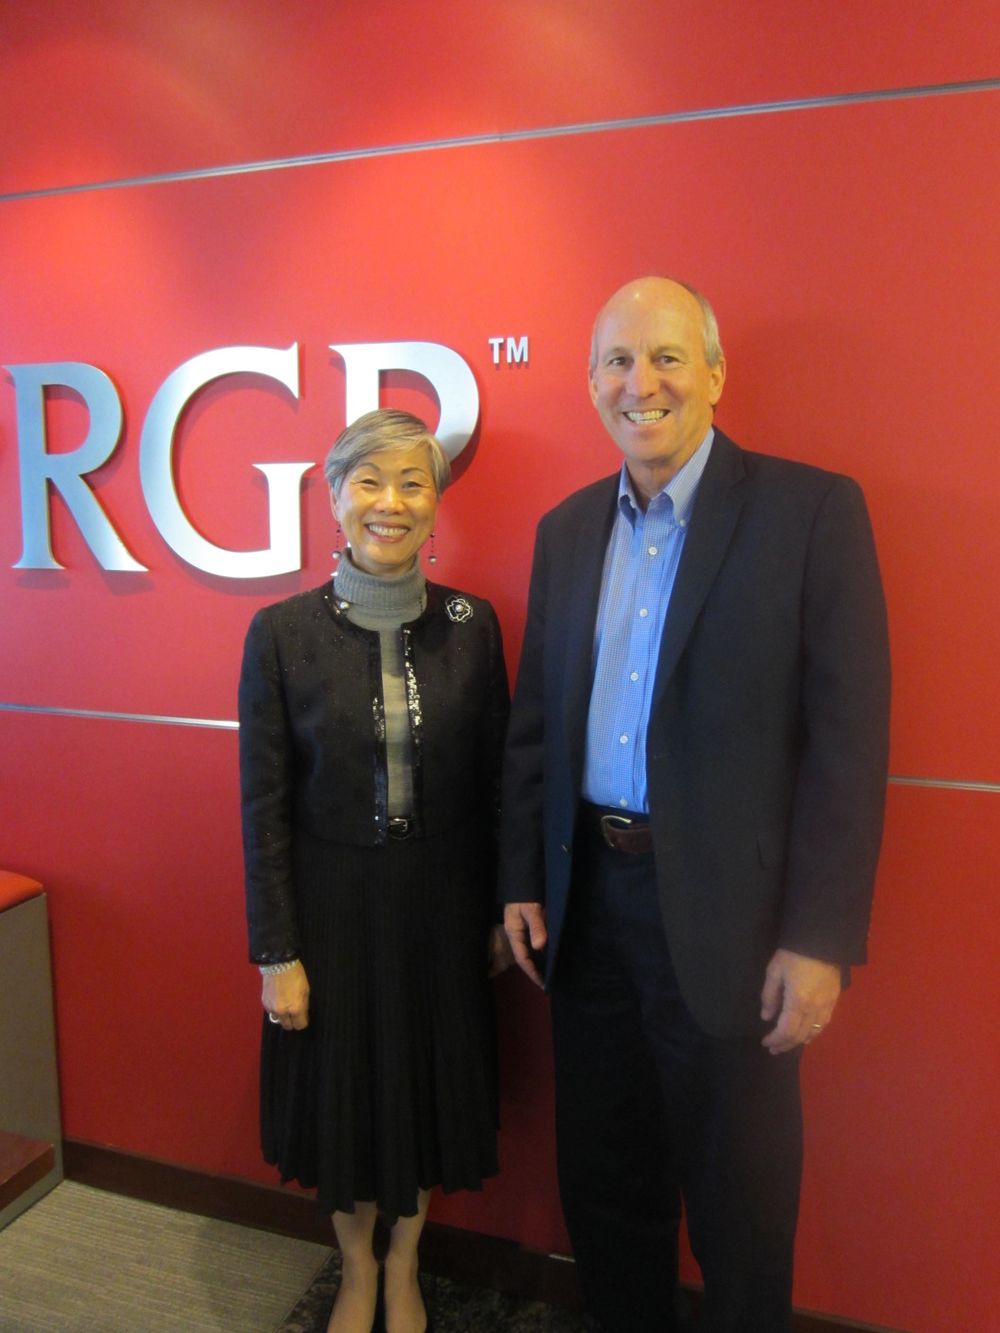 (From left): Anne Shih, board member, and Tony Cherbak, president and CEO